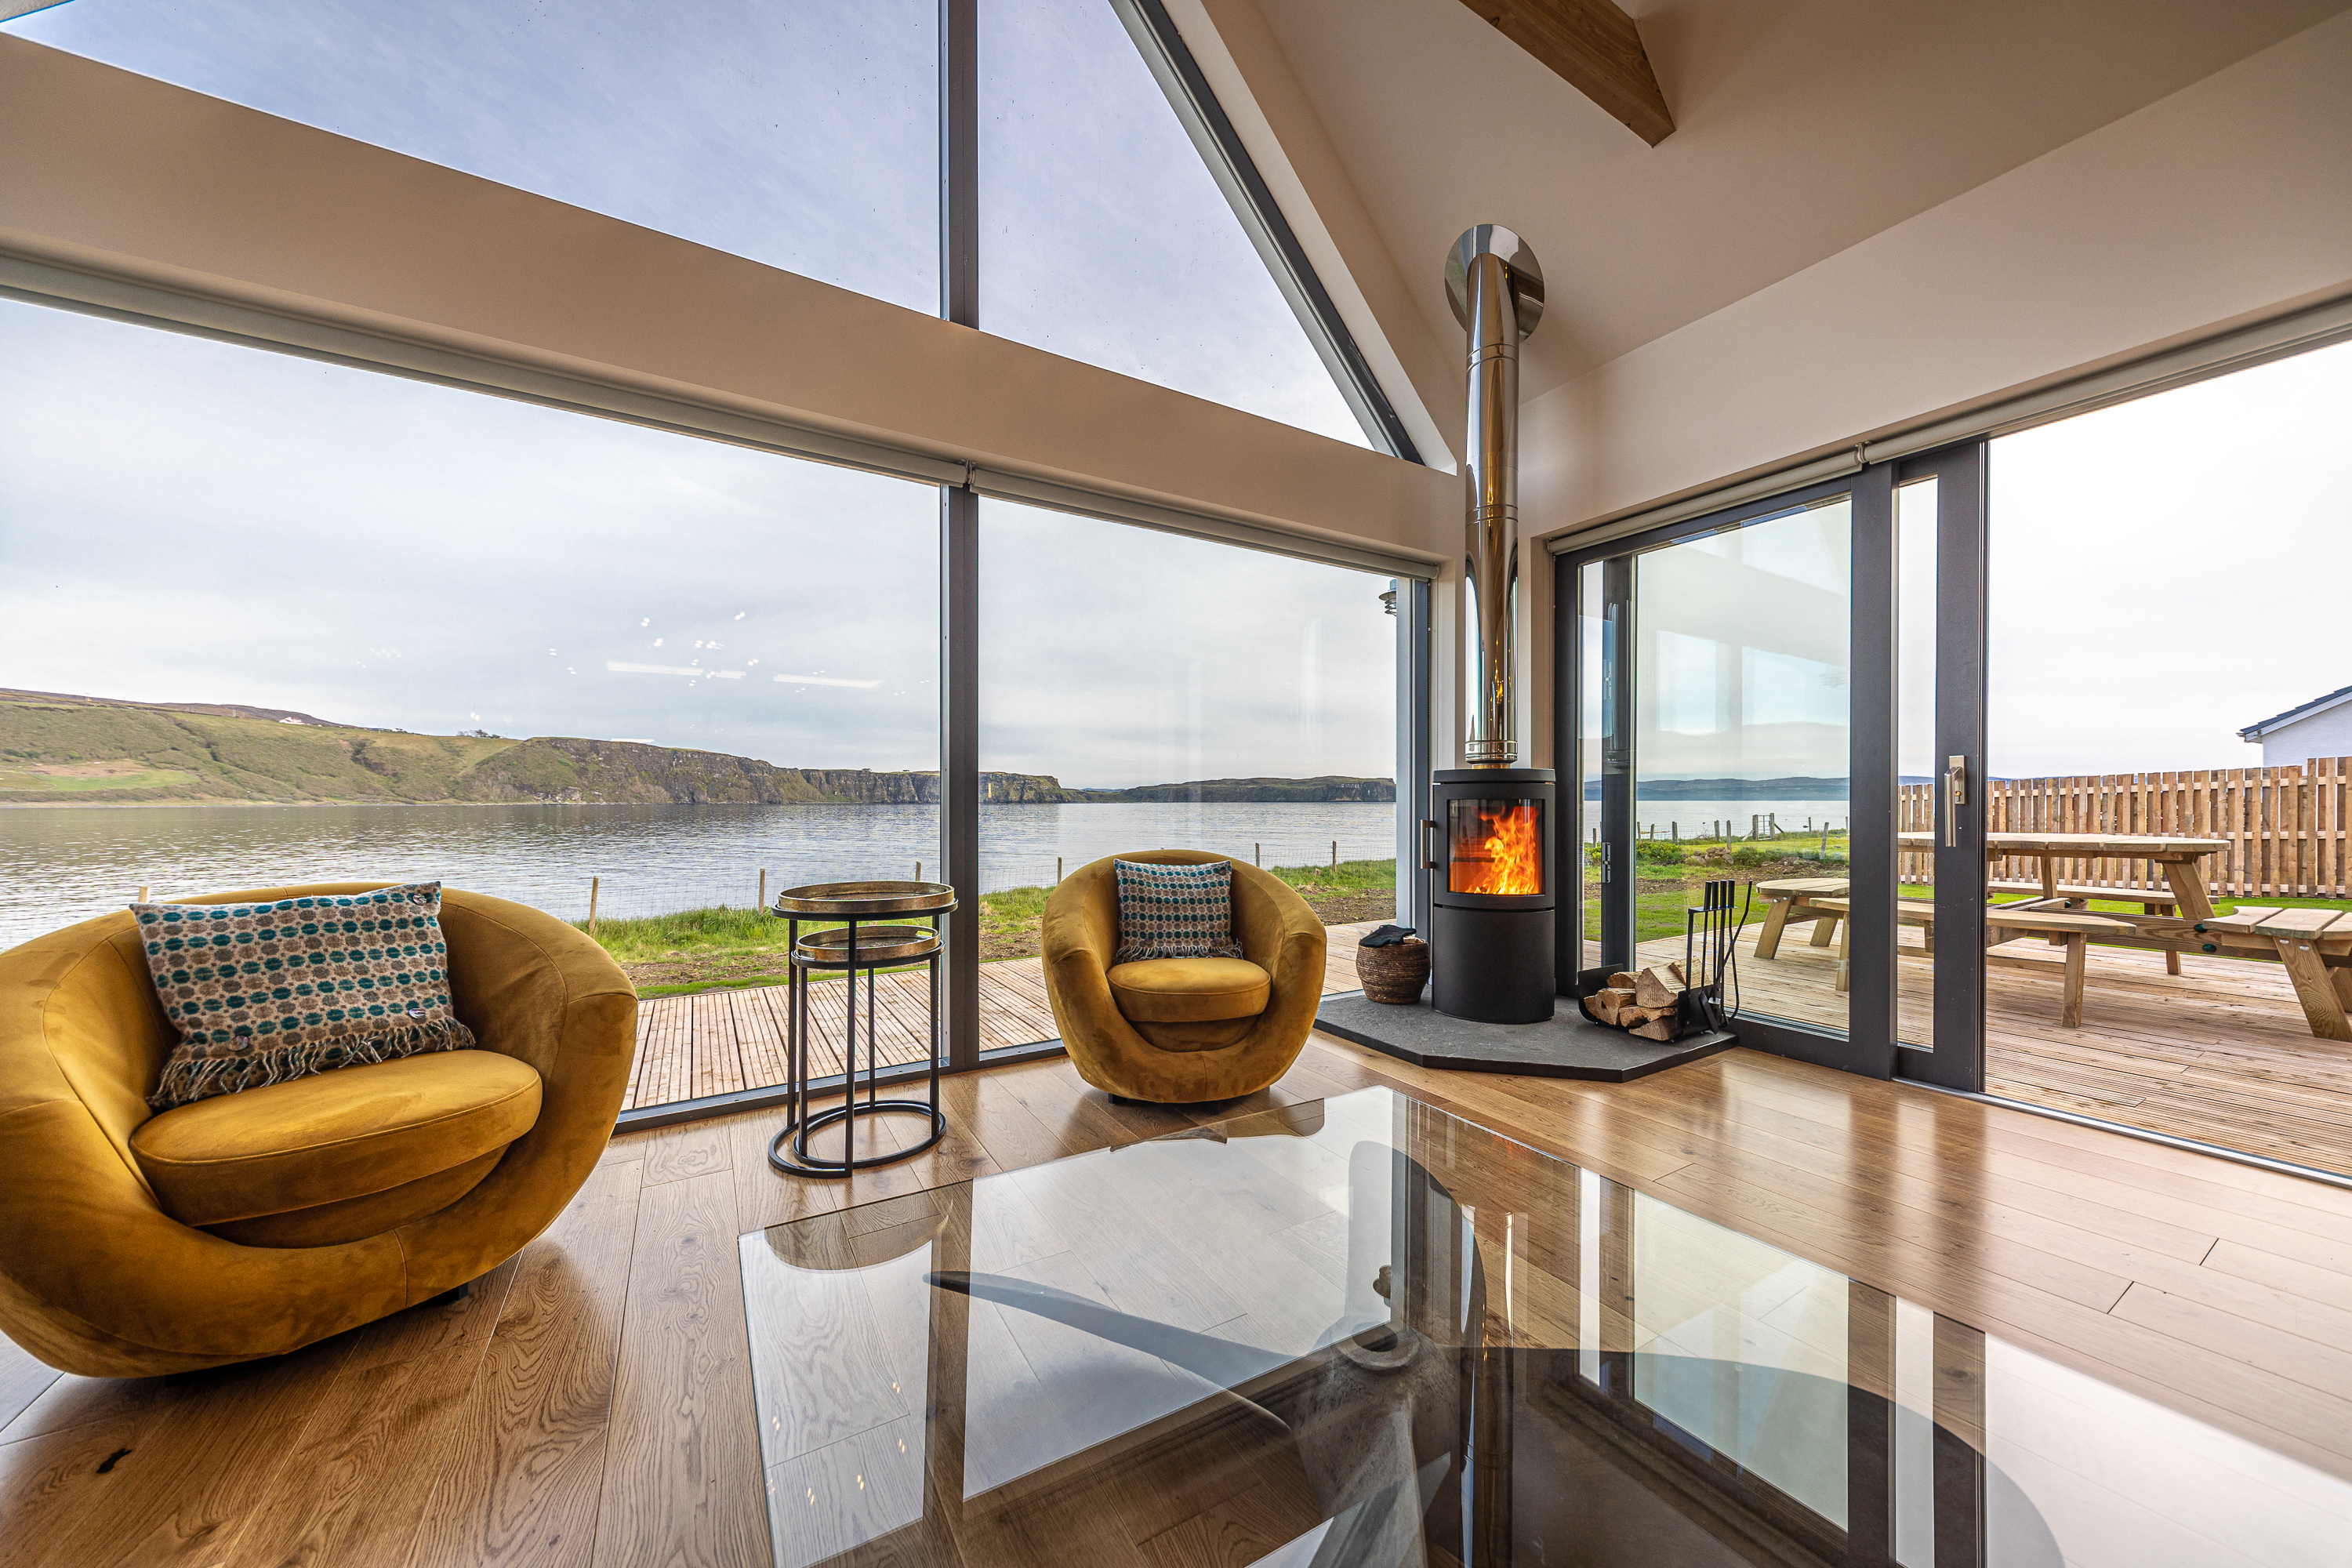 Guests at the Isle of Skye property can see seals from the deck and the living room